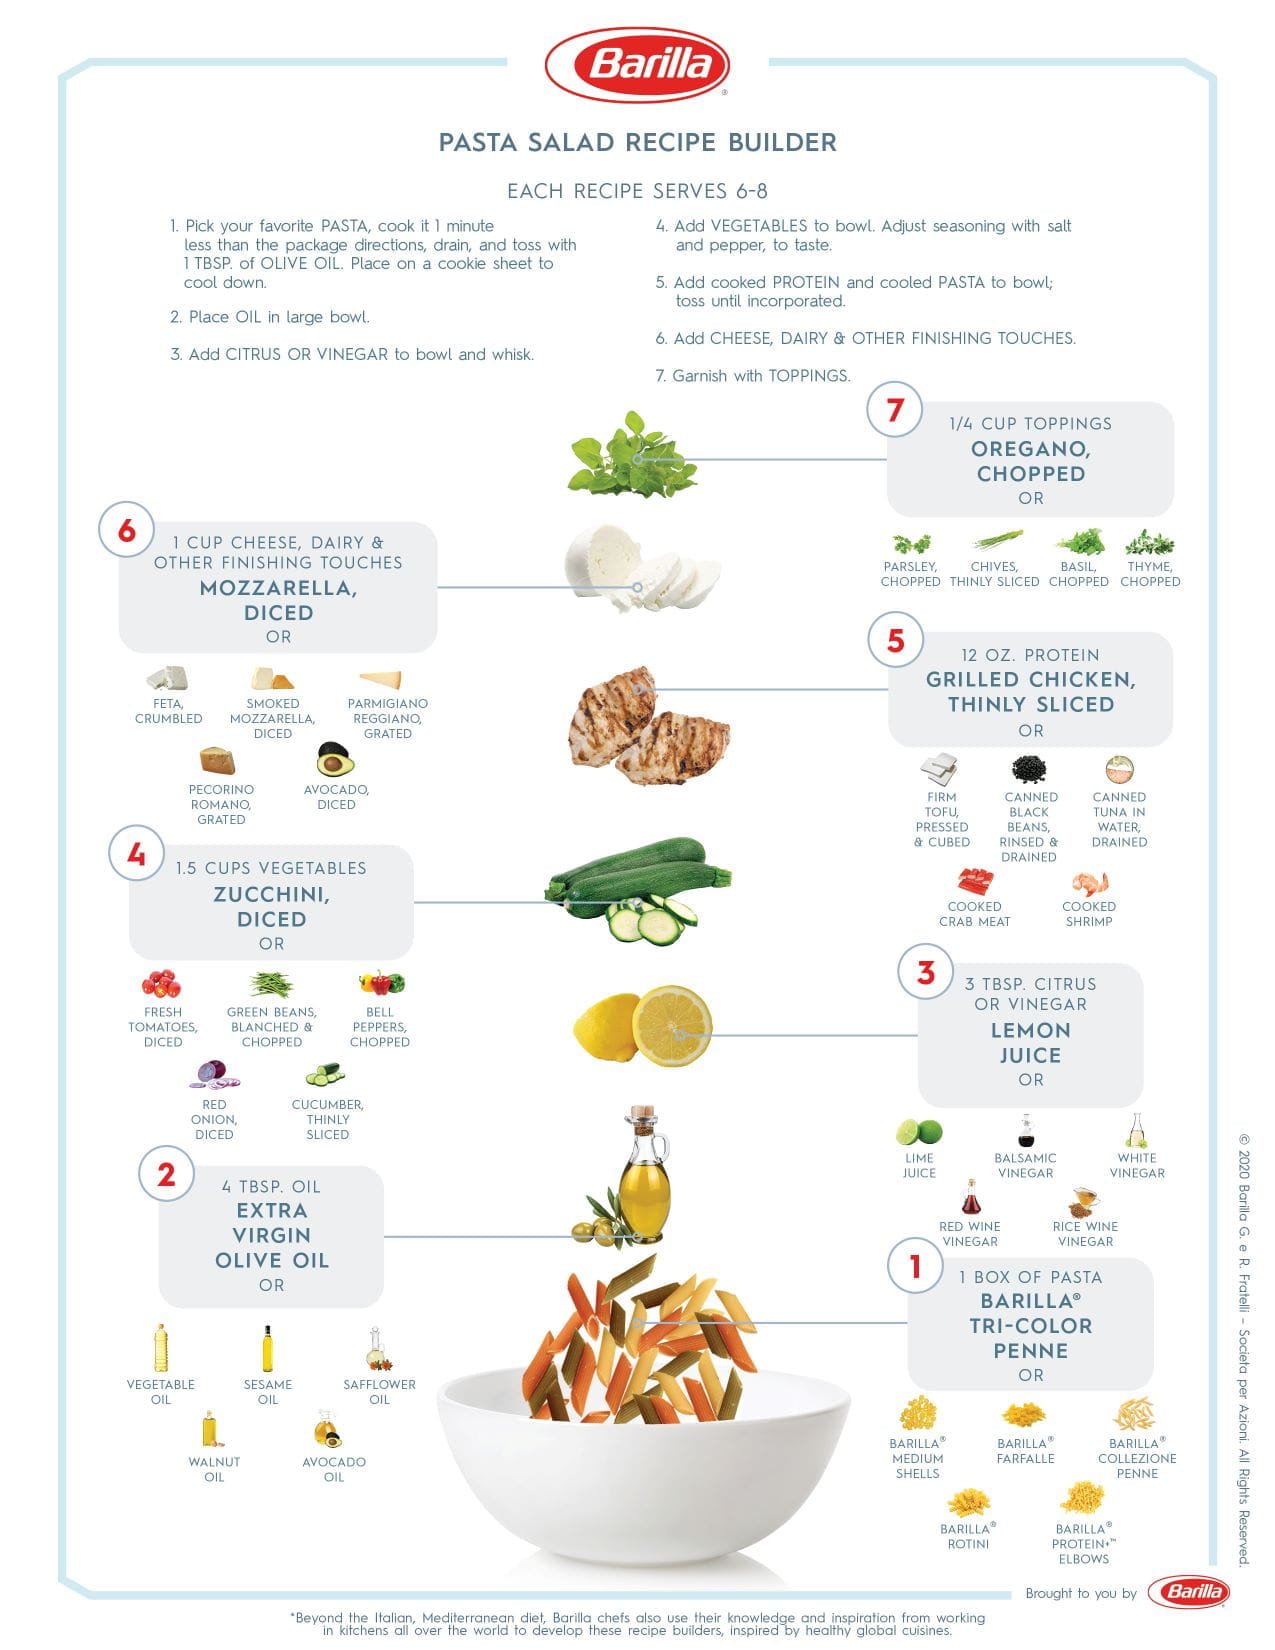 Pasta Salad Recipe Builder inspired by the flavors of Italy